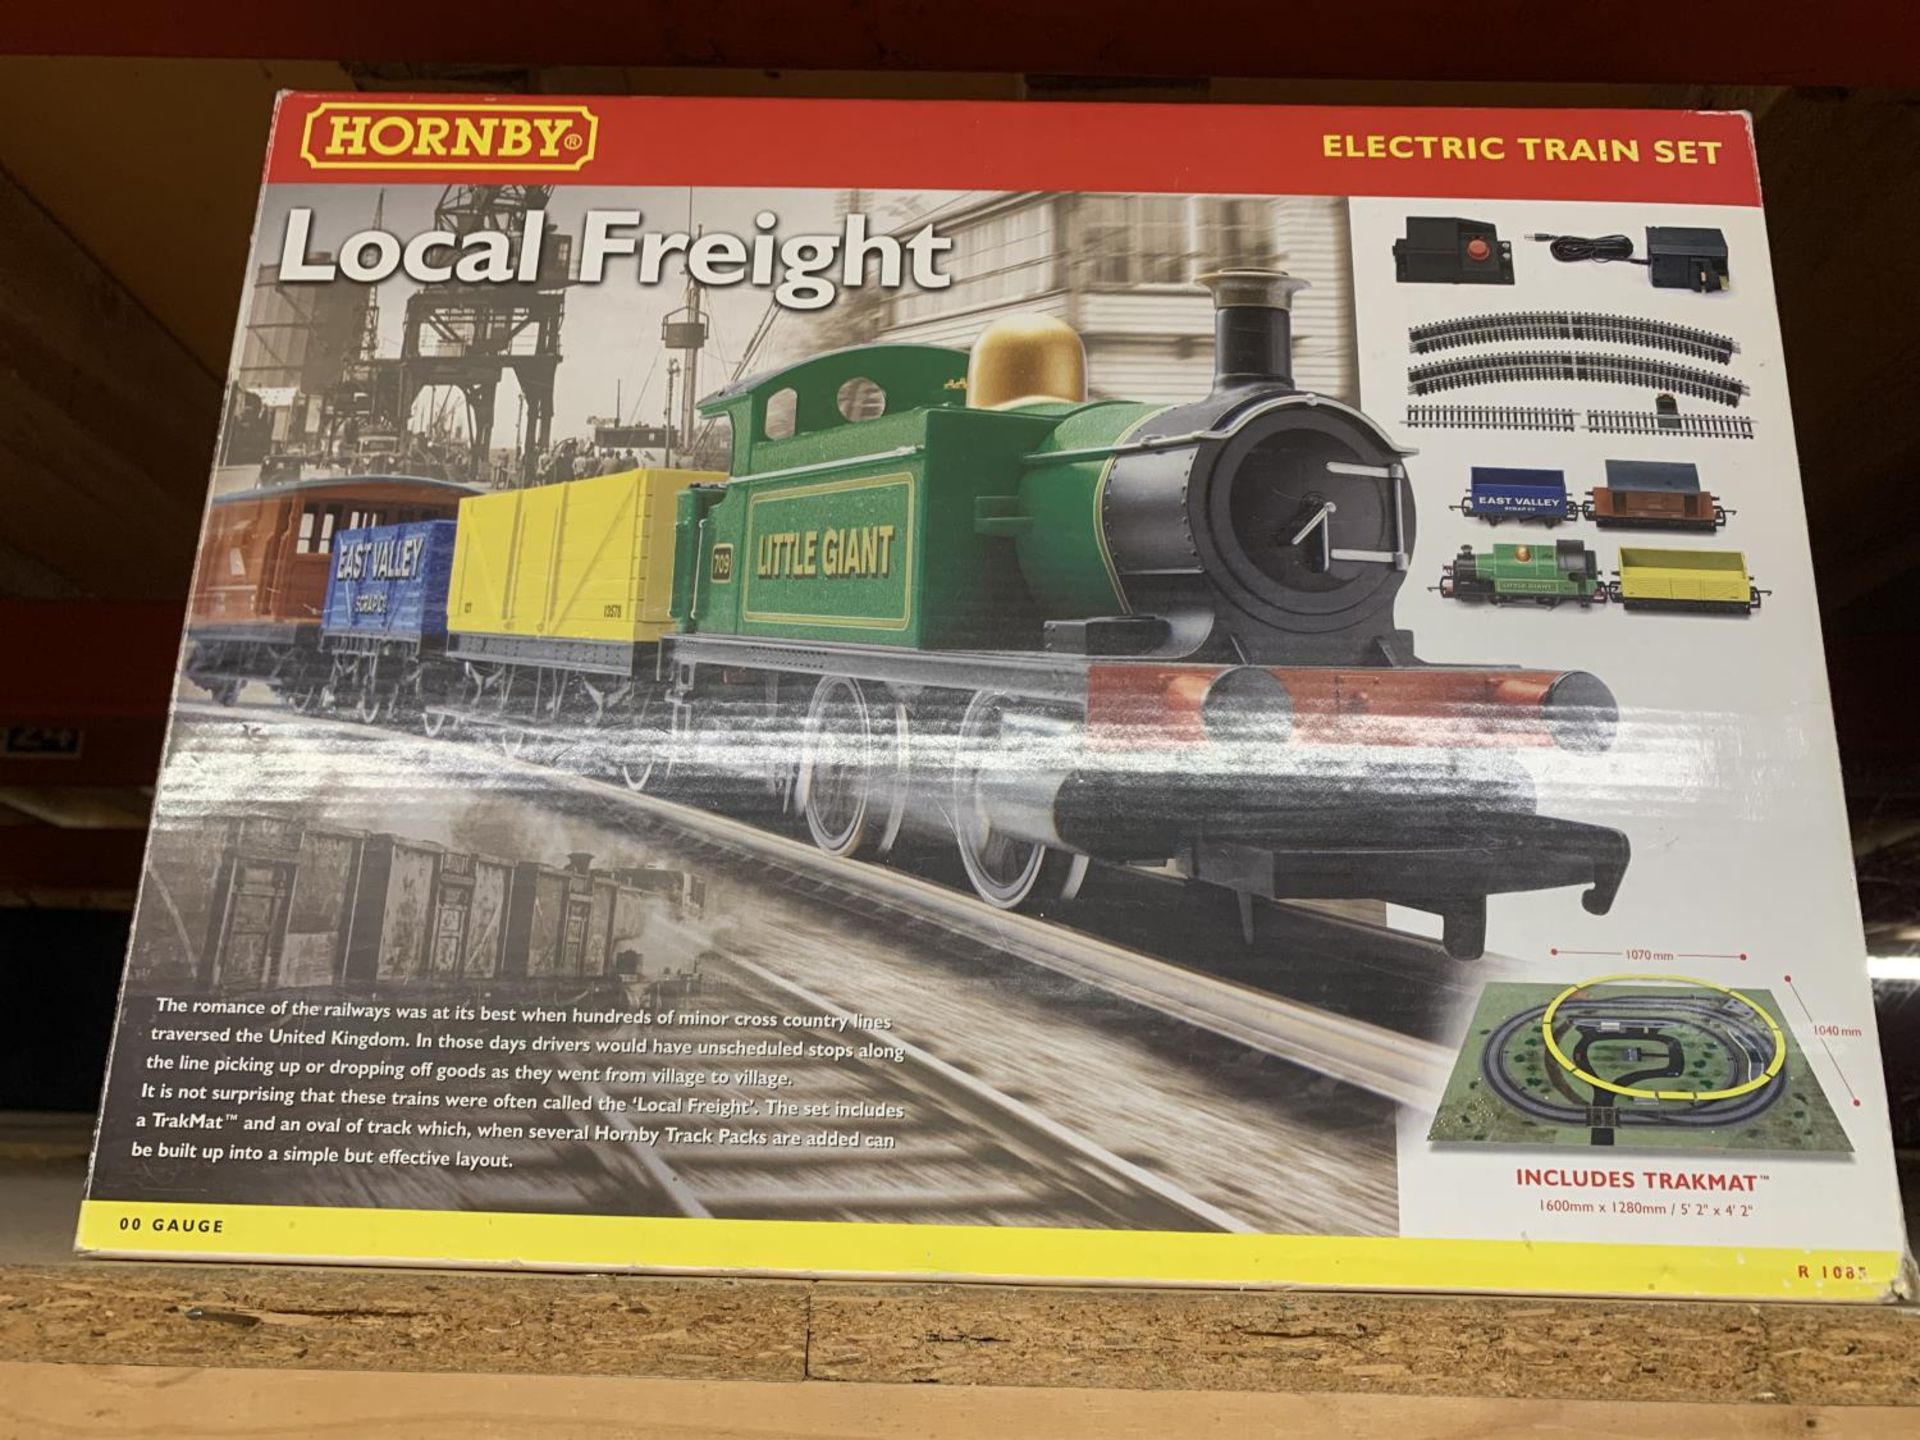 A HORNBY 00 GAUGE LOCAL FRIEGHT ELECTRIC TRAIN SET